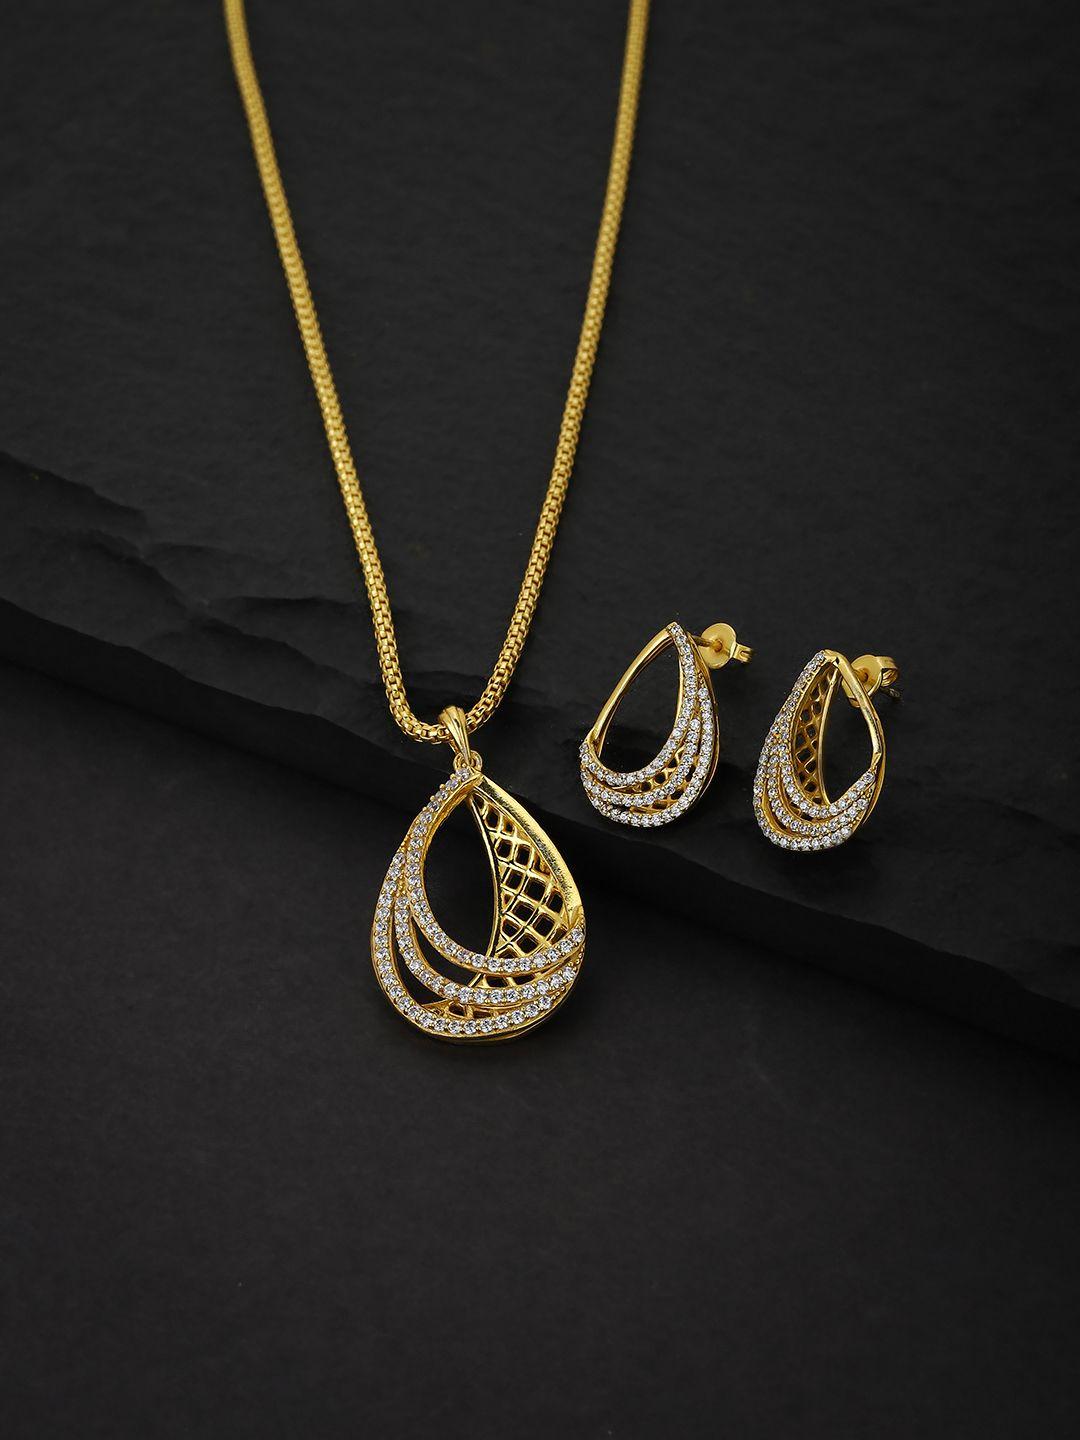 carlton-london-women-gold-toned-handcrafted-cubic-zirconia-studded-necklace-with-earrings